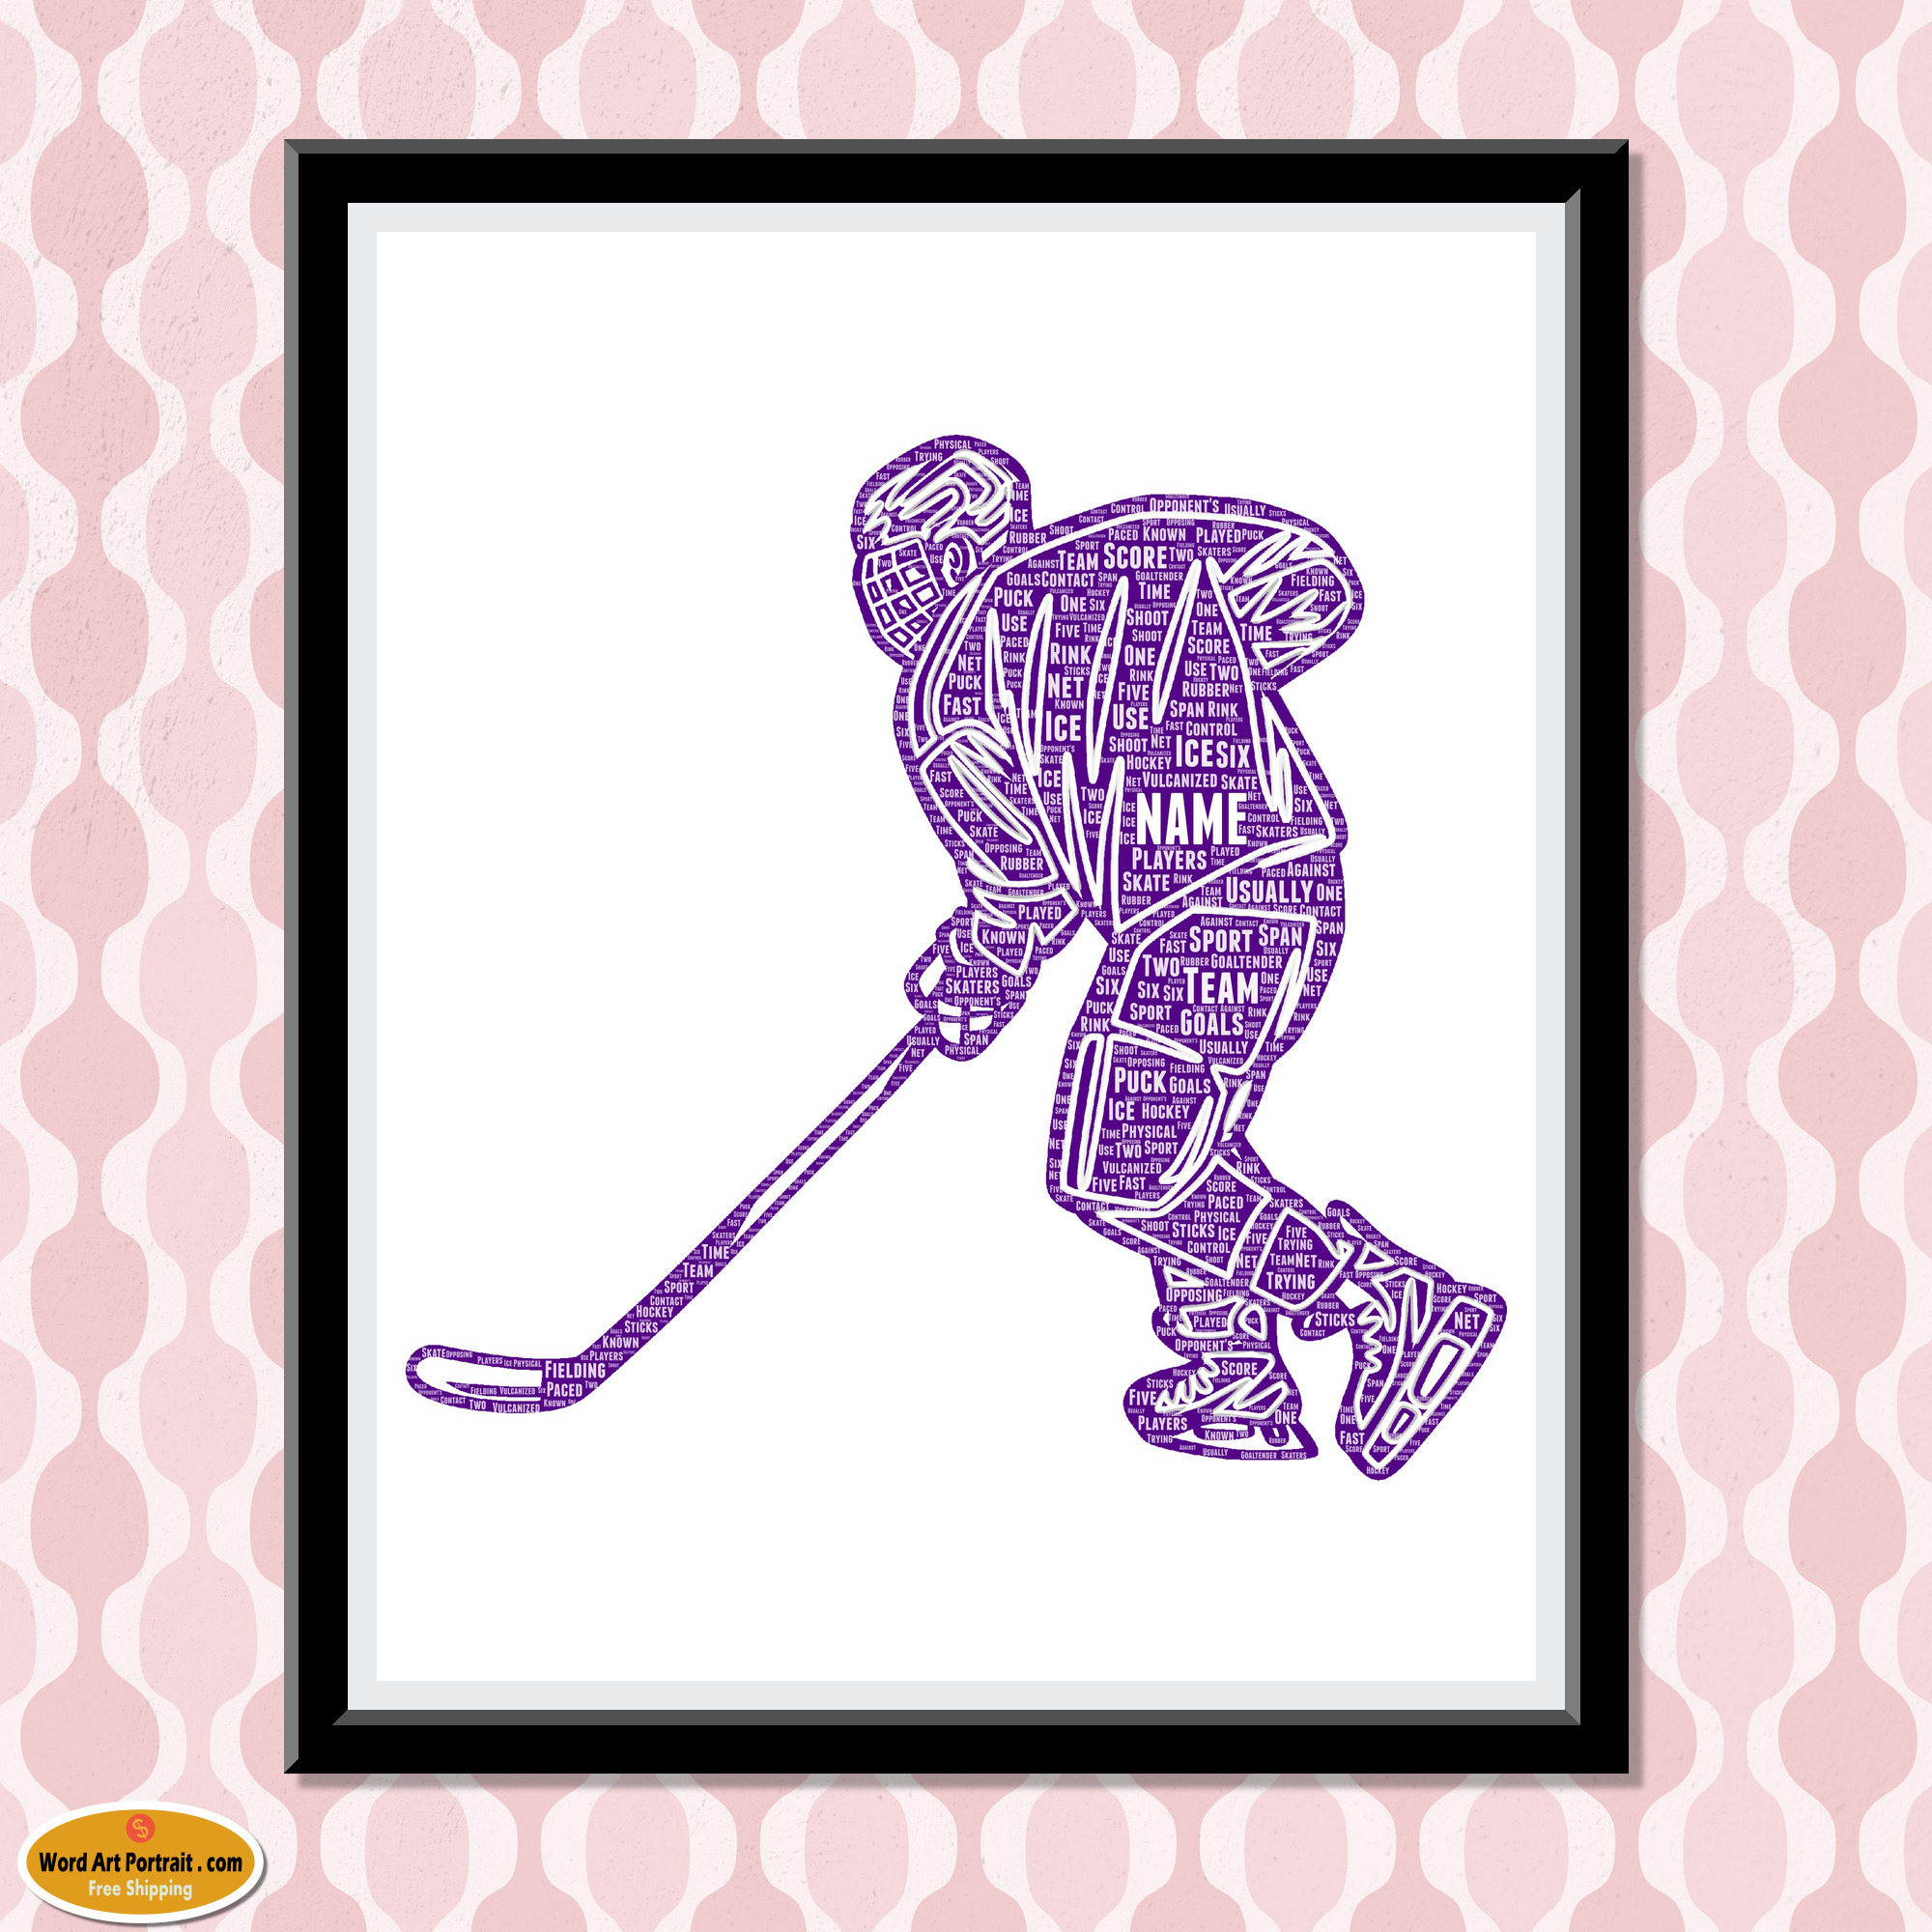 Ice hockey gift ice hockey gifts for him players coach gift ideas